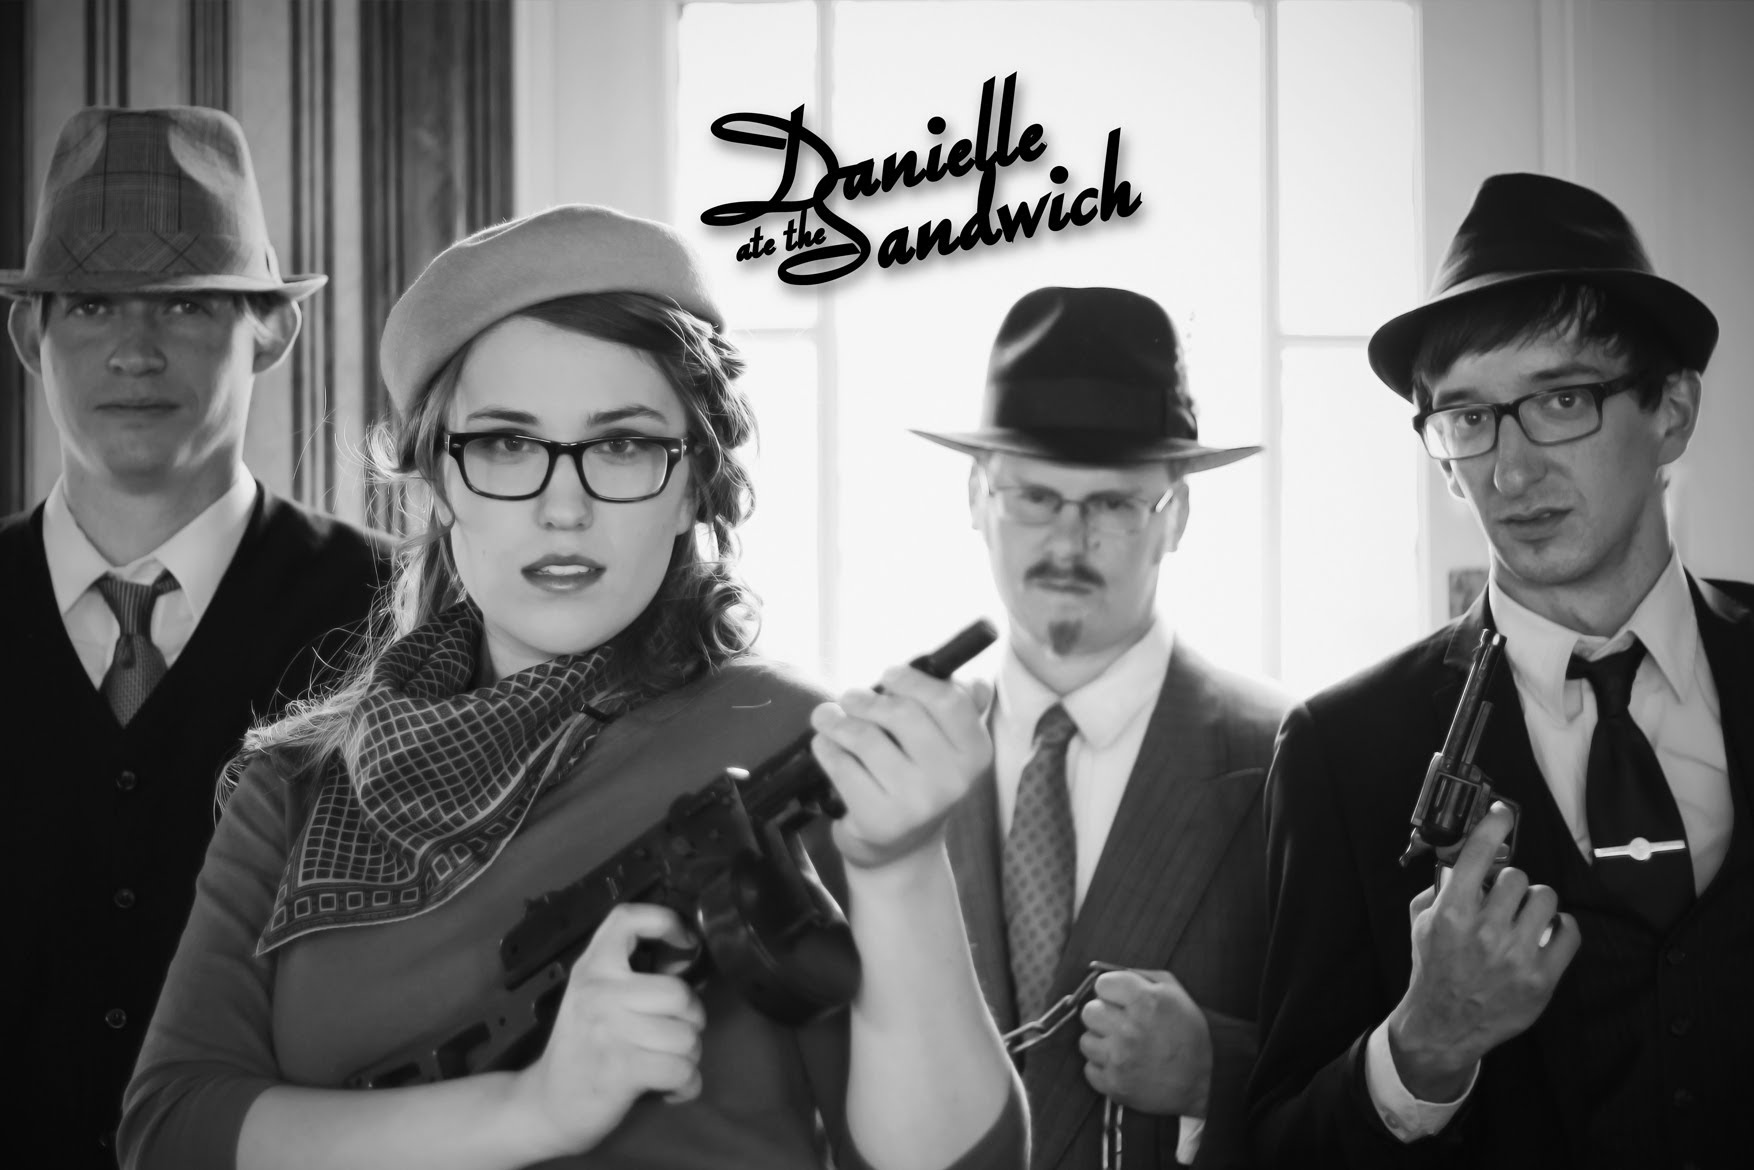 Faith In A Man (original ukulele song by Danielle Ate The Sandwich-OFFICIAL)